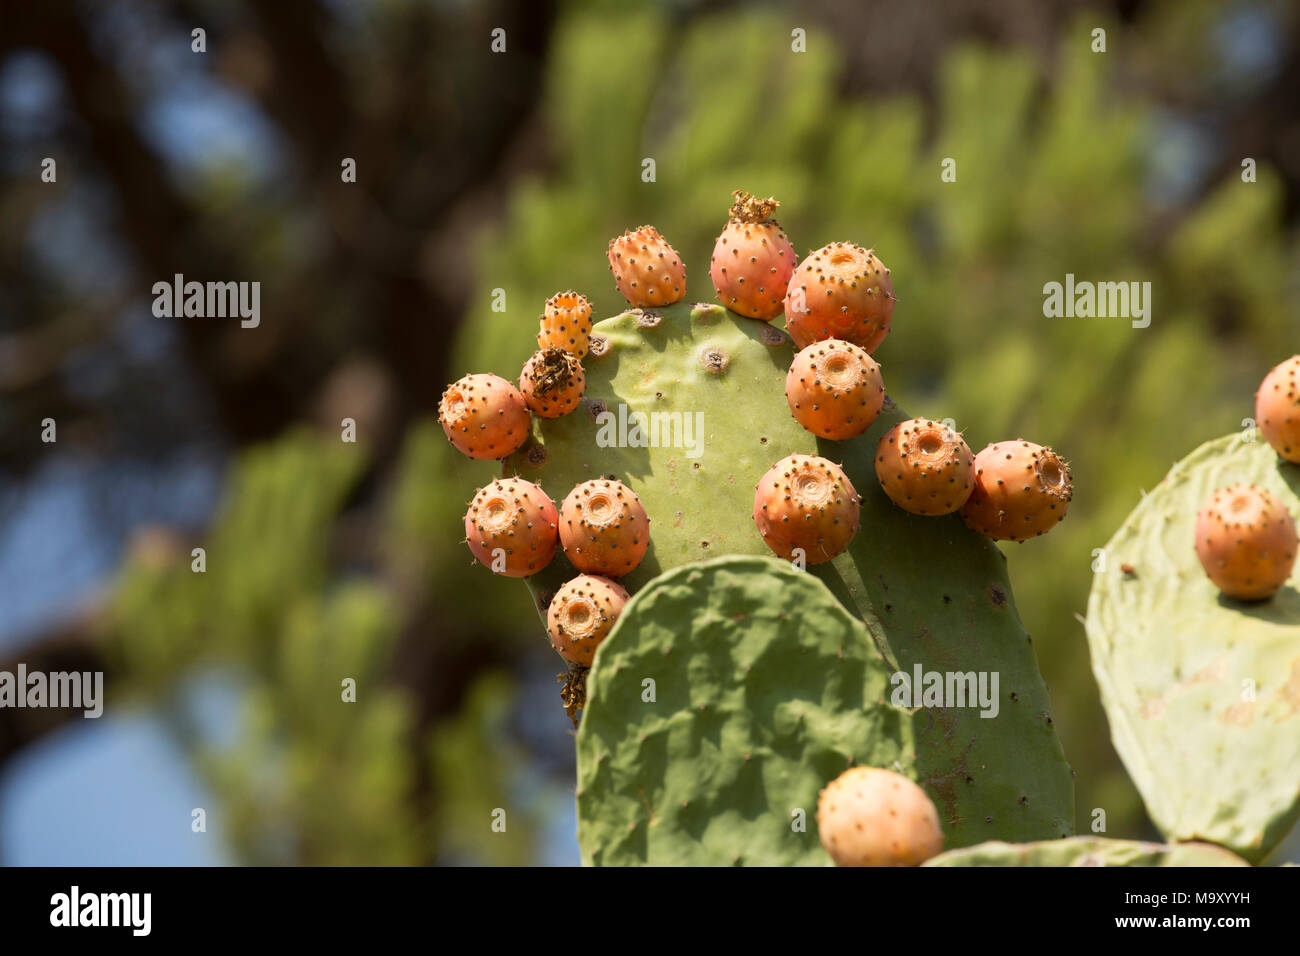 Prickly pears, Opuntia ficus-indica, growing on an estate in Tuscany Italy Stock Photo